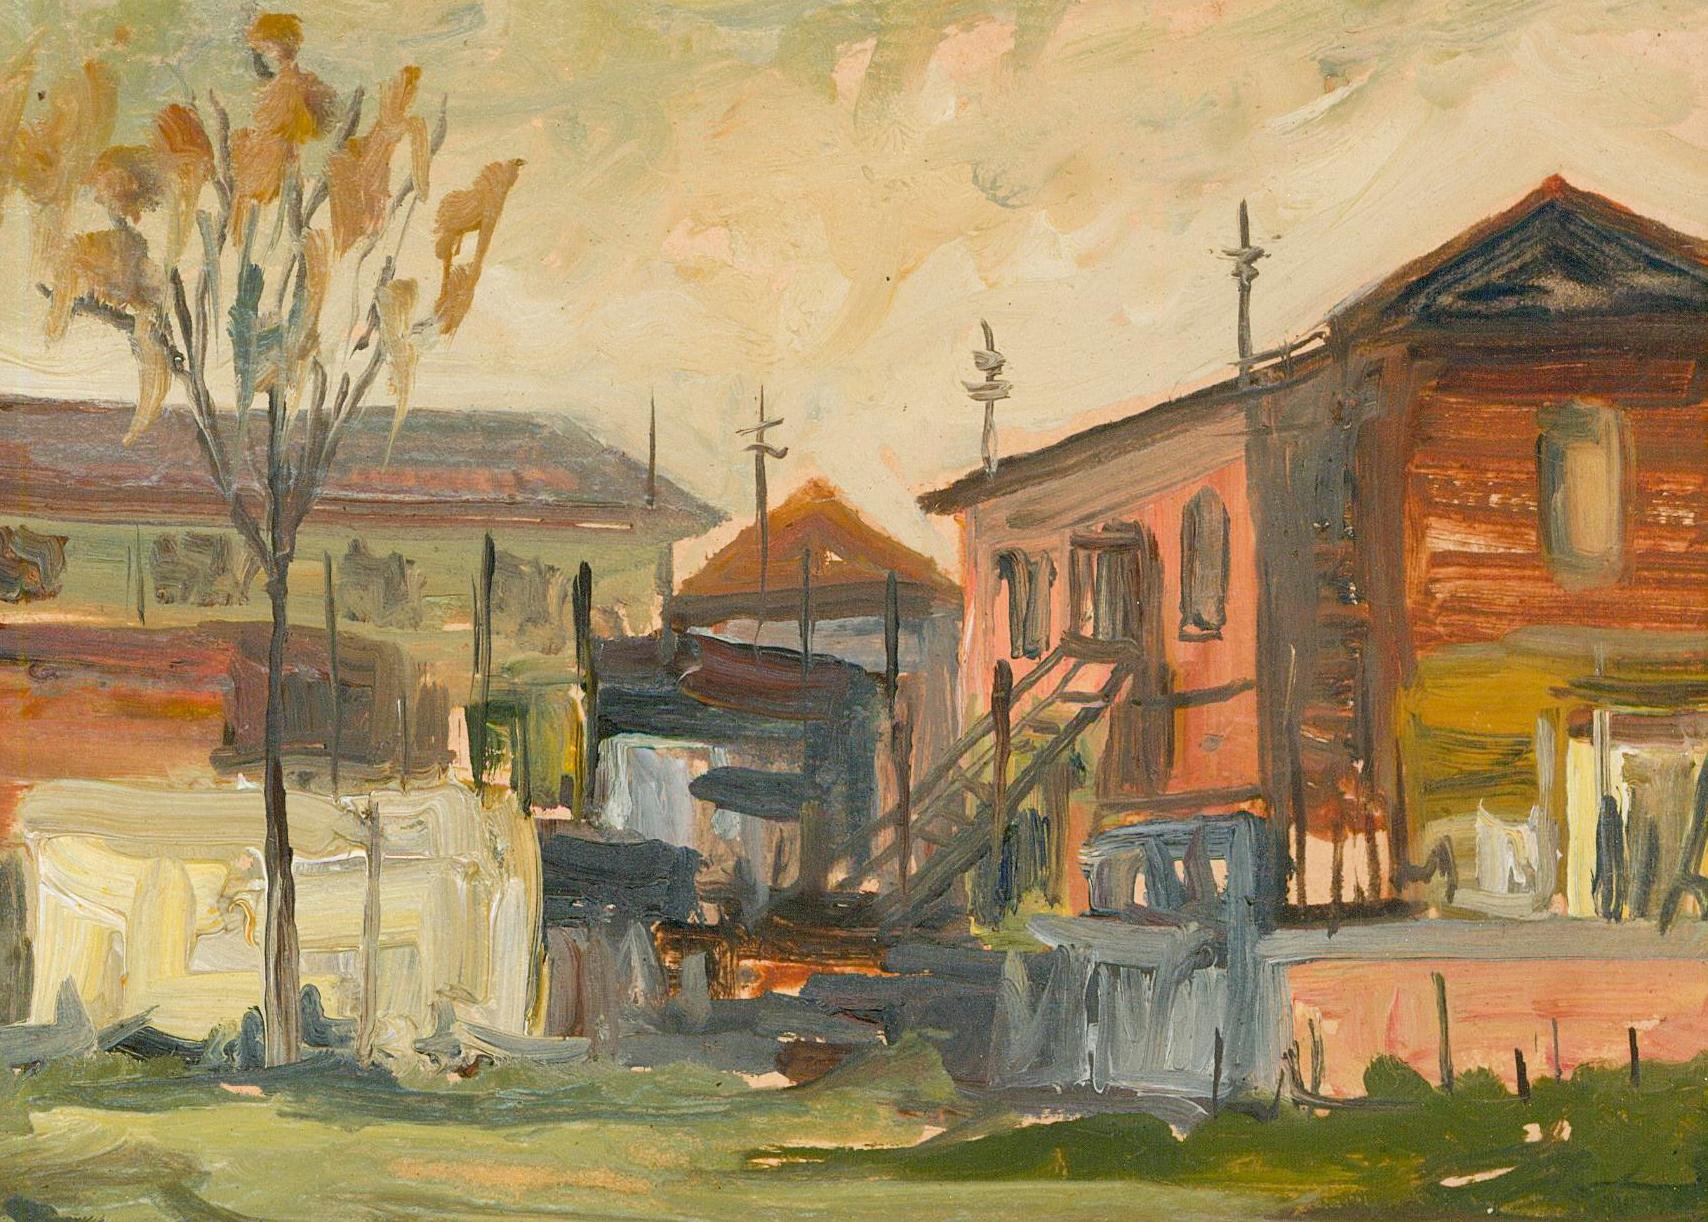 Framed 20th Century Oil - Rural Landscape with Rustic Buildings - Painting by Unknown